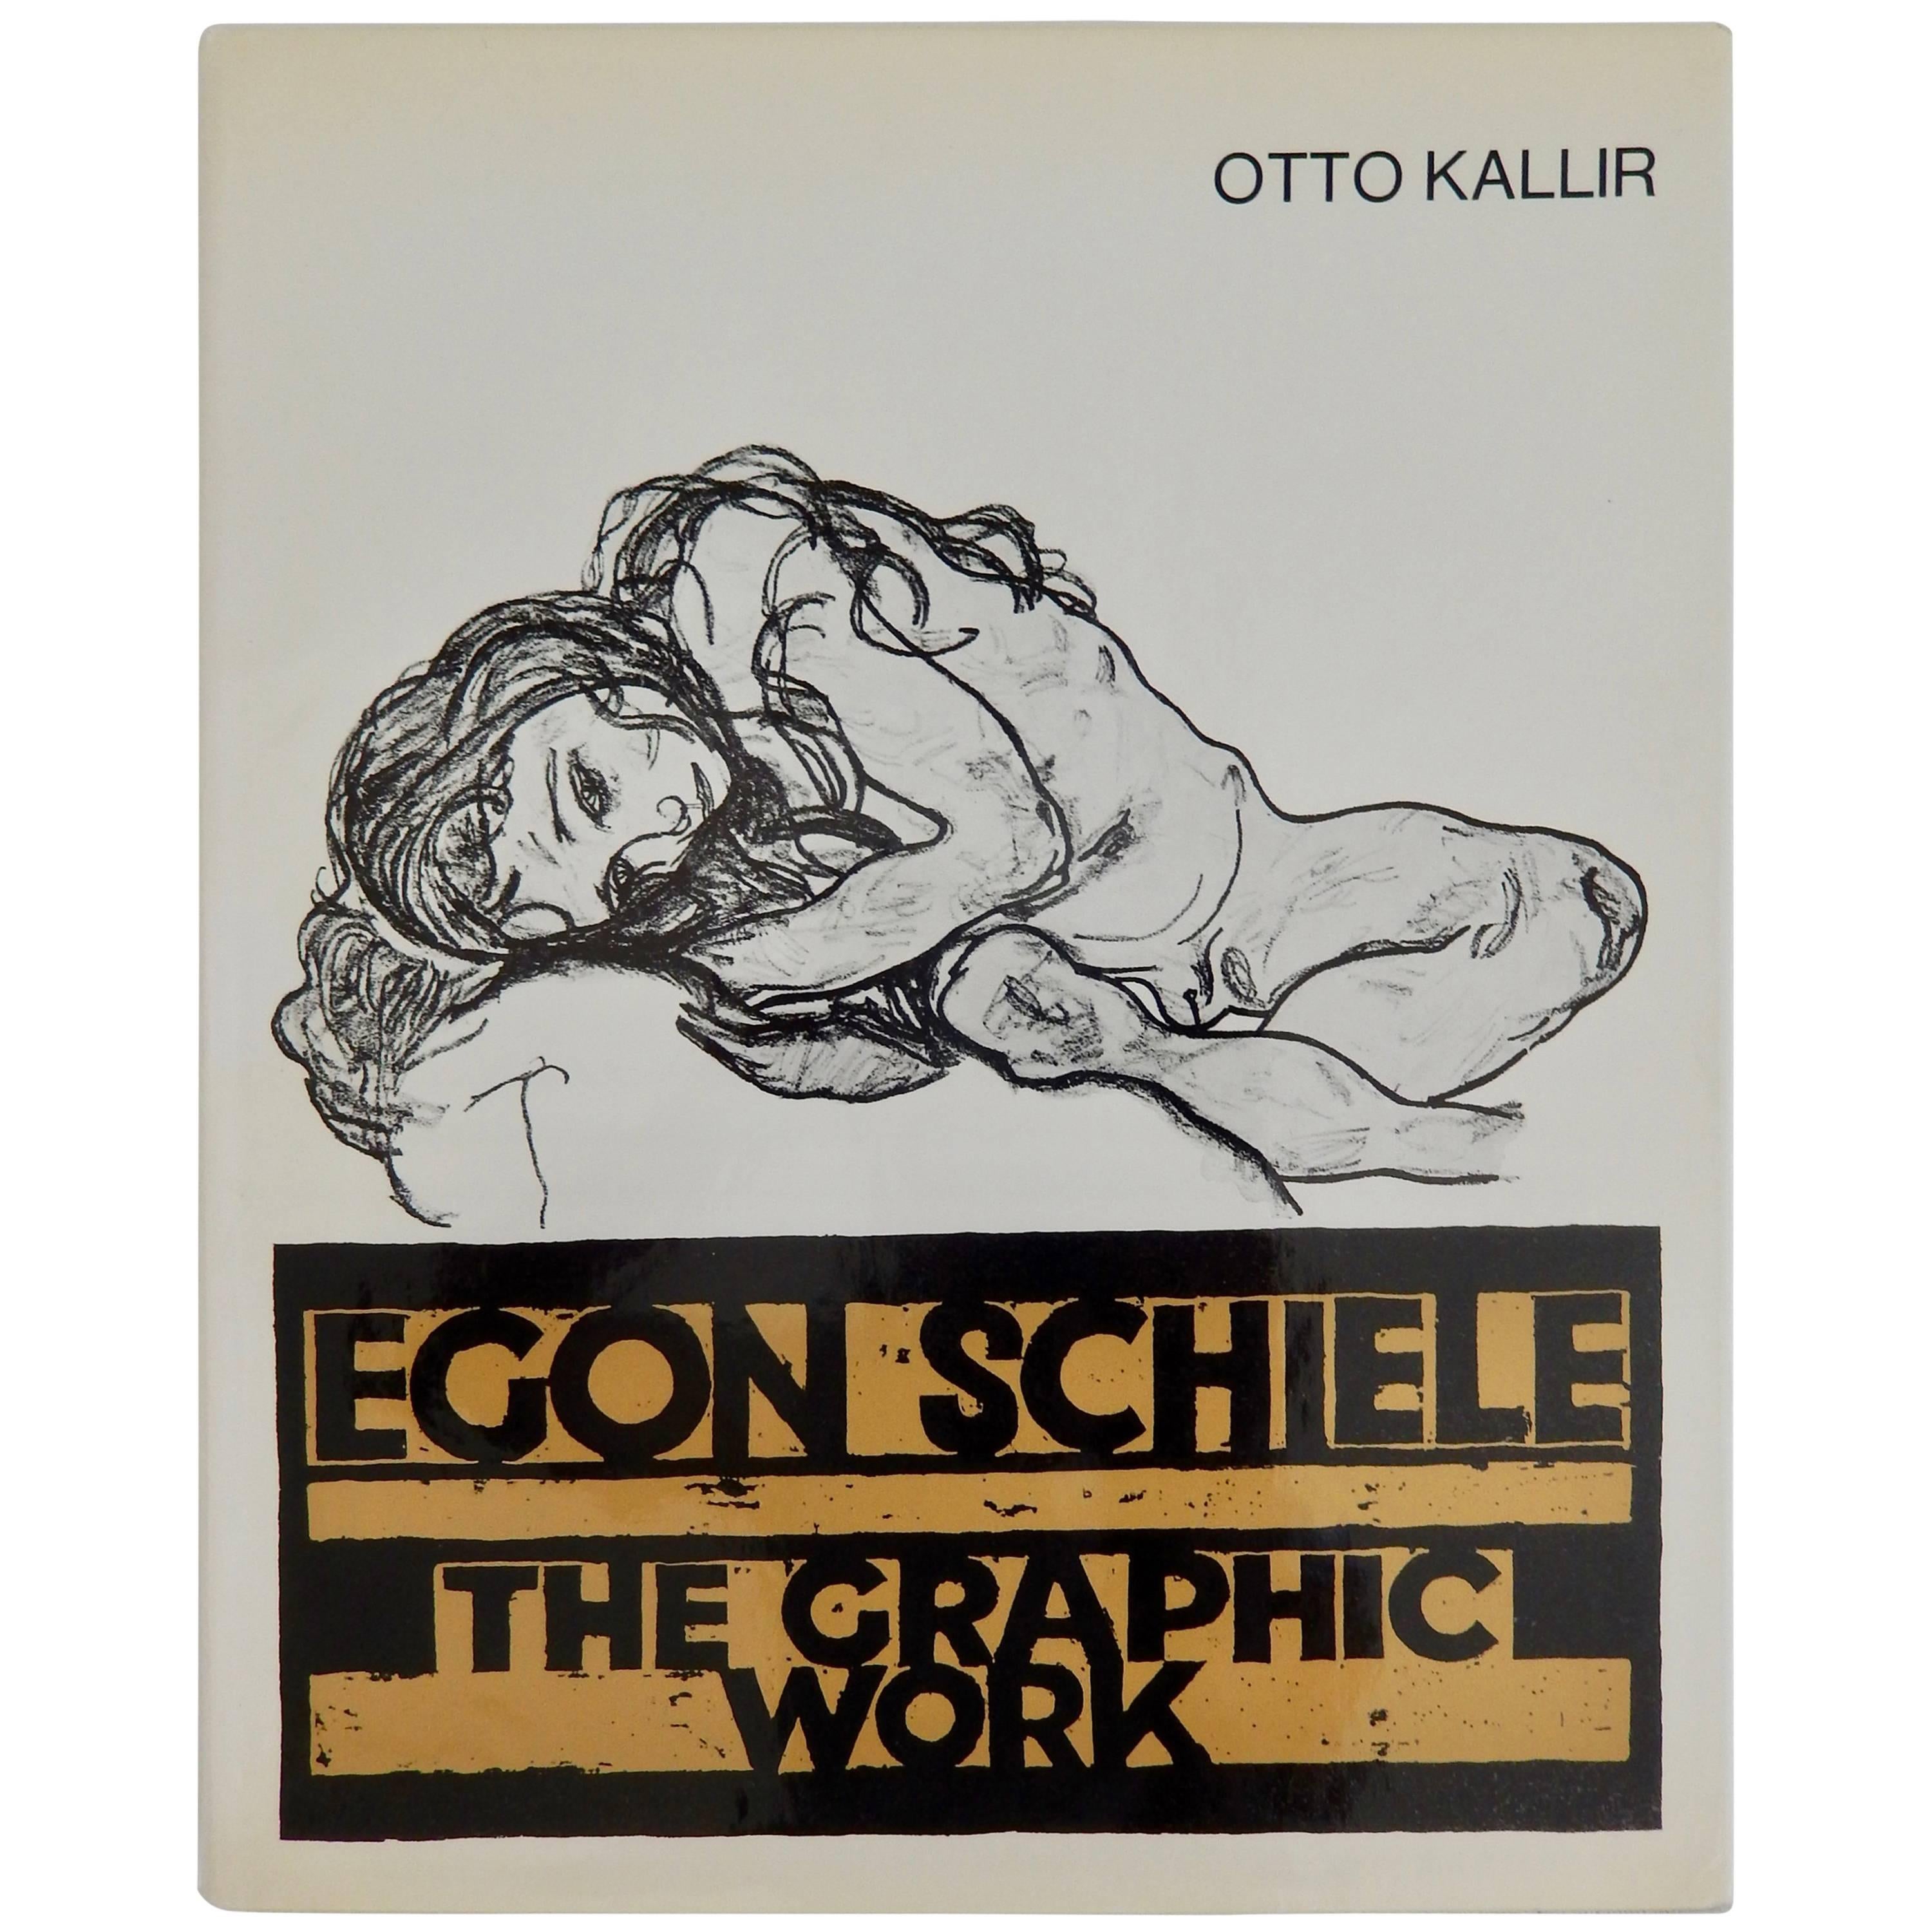 Egon Schiele, The Graphic Work, Reference Book by Otto Kallir, 1970